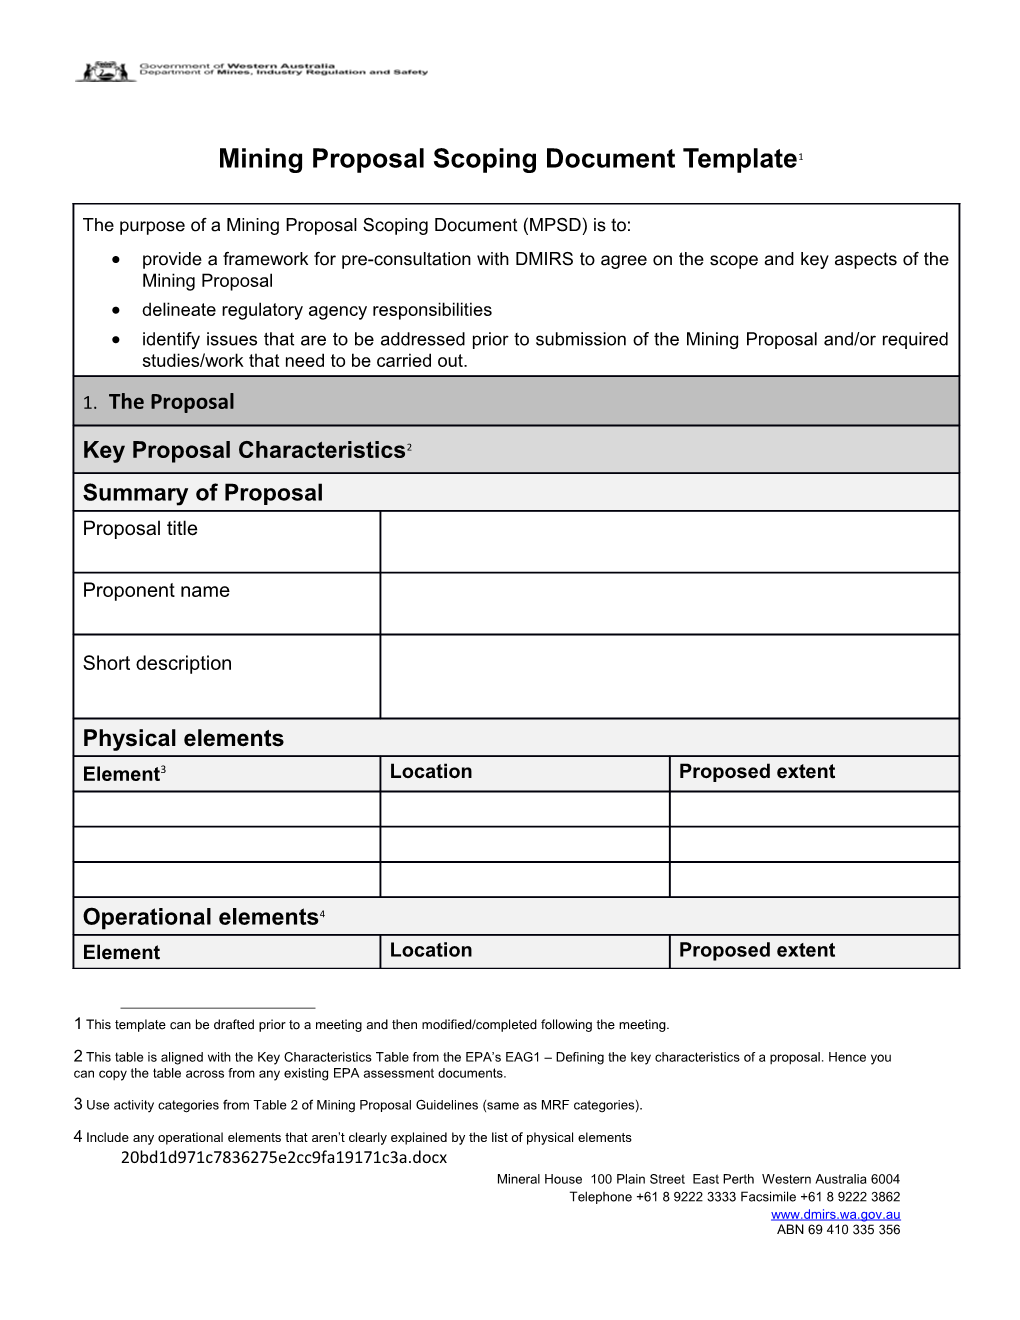 Mining Proposal Scoping Document Template